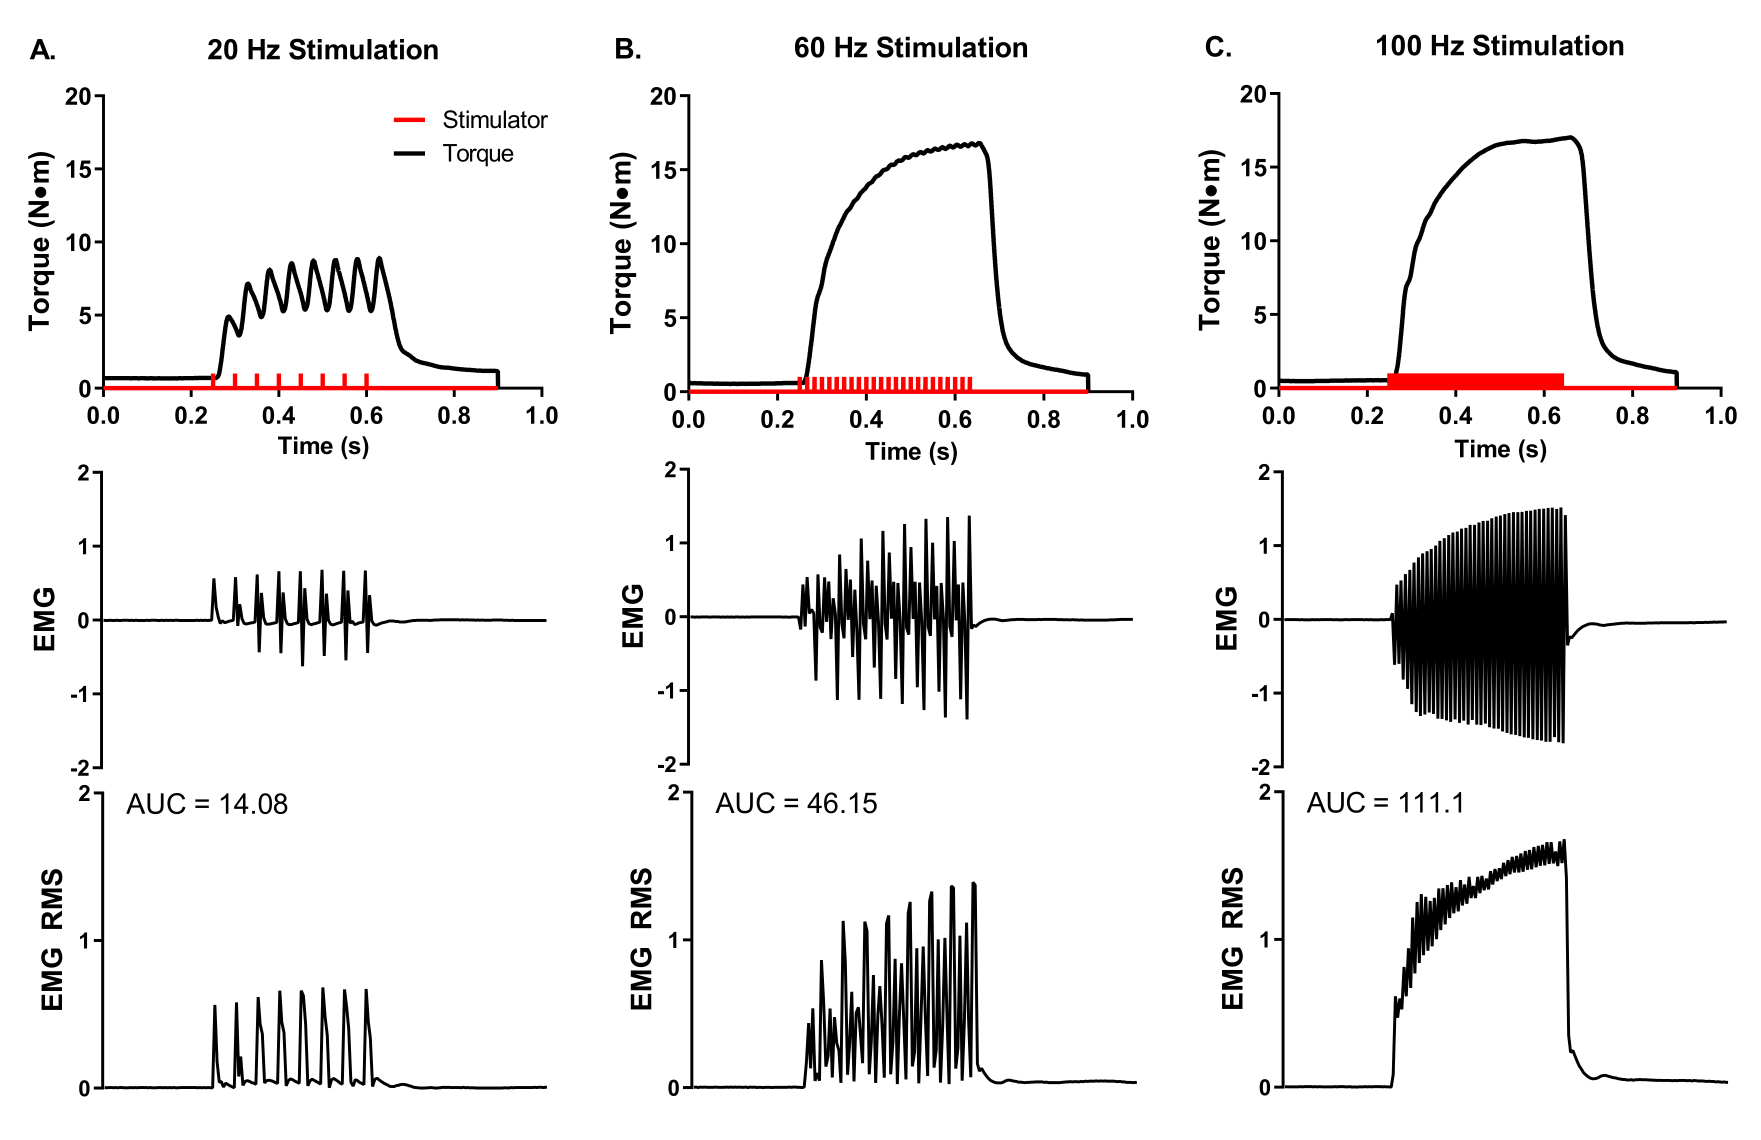 Influence of caffeine on the maximal isometric and concentric force  produced by skinned fibers